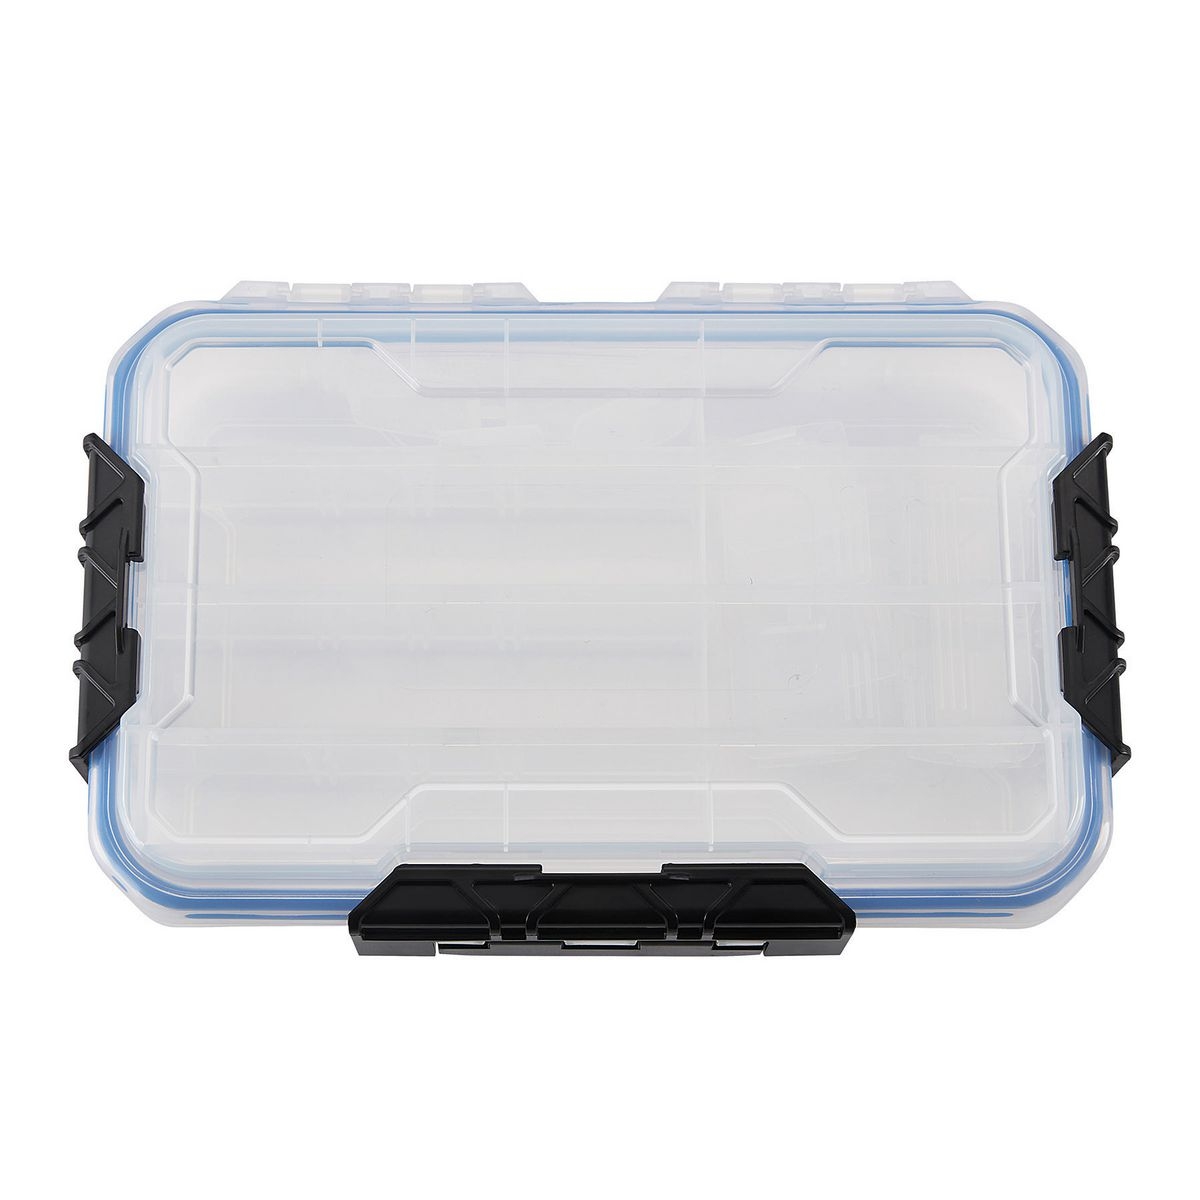 STOREHOUSE Small Organizer IP55 Rated - Item 56610